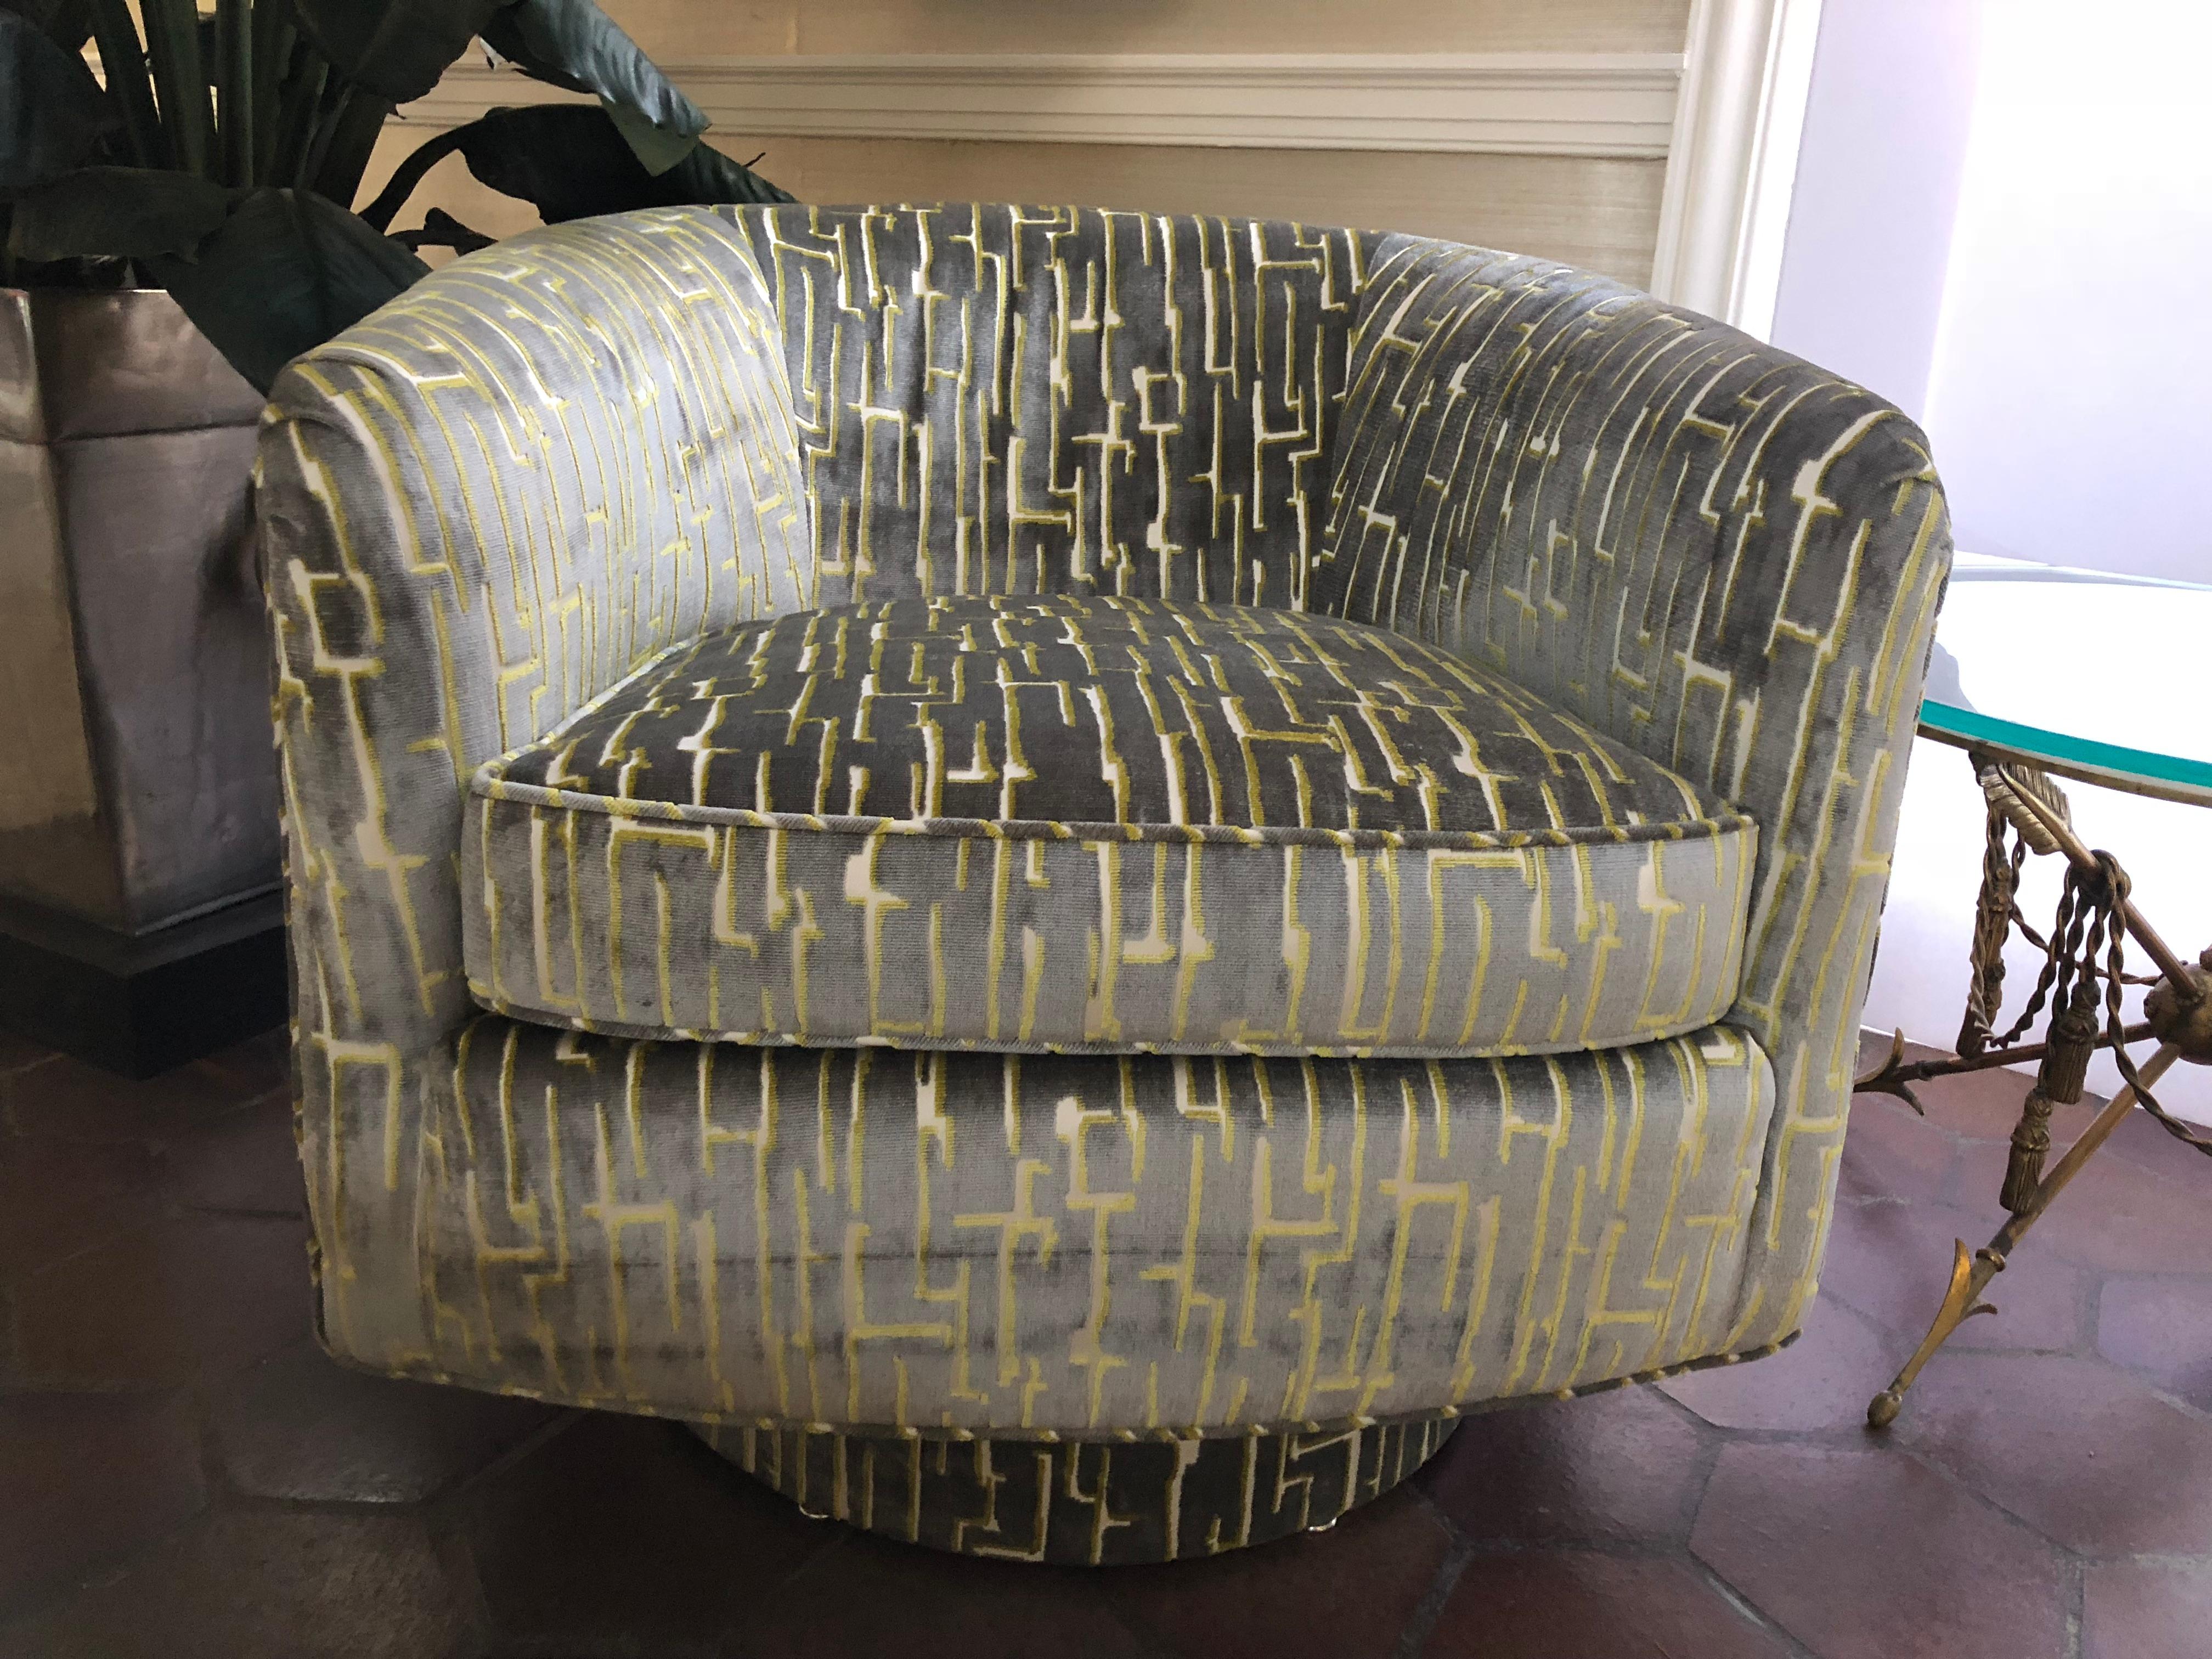 Super cool pair of Milo Baughman style 360 degree swivel chairs in new cut velvet upholstery in a grey and chartreuse geometric pattern. Seat height is 18 arm height is 24 seat depth is 21 seat interior width is 20.